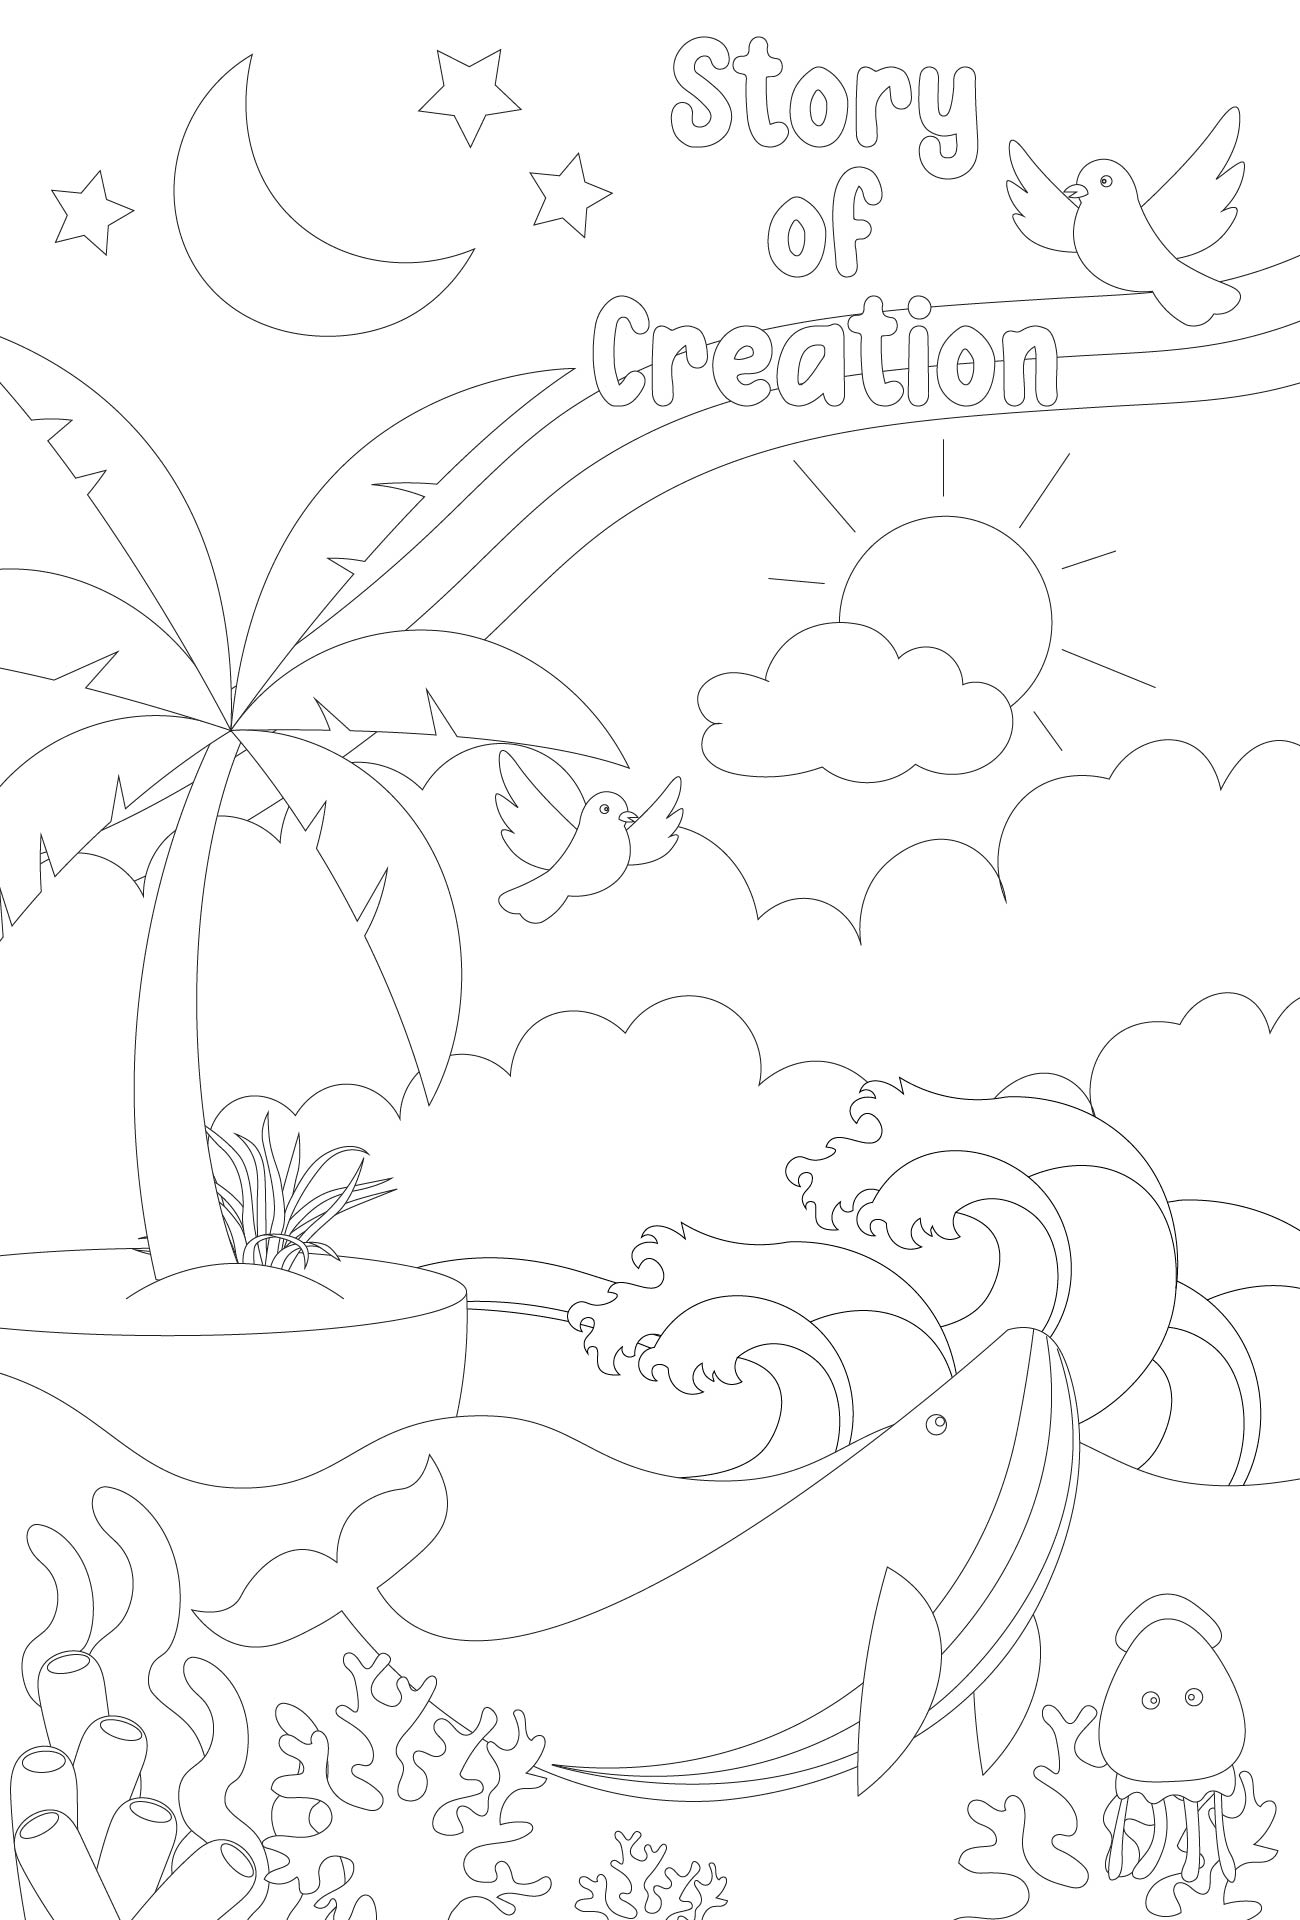 LDS Creation Coloring Pages